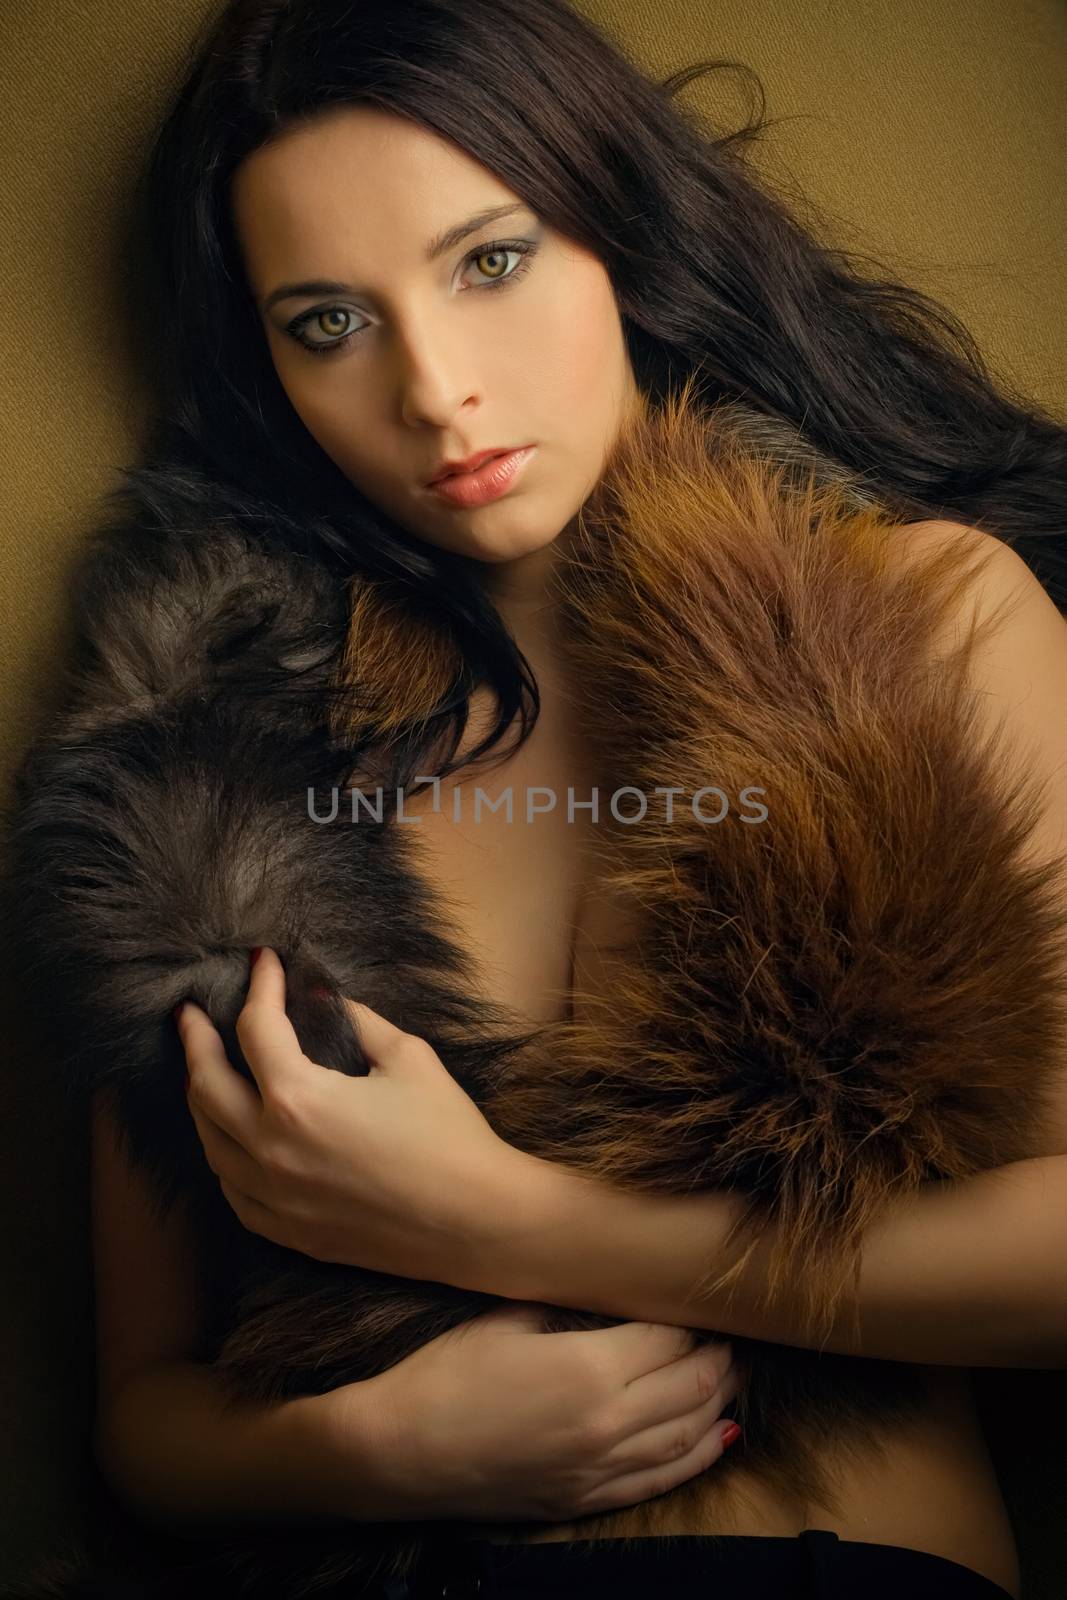 lust attractive glamor girl with brown boa